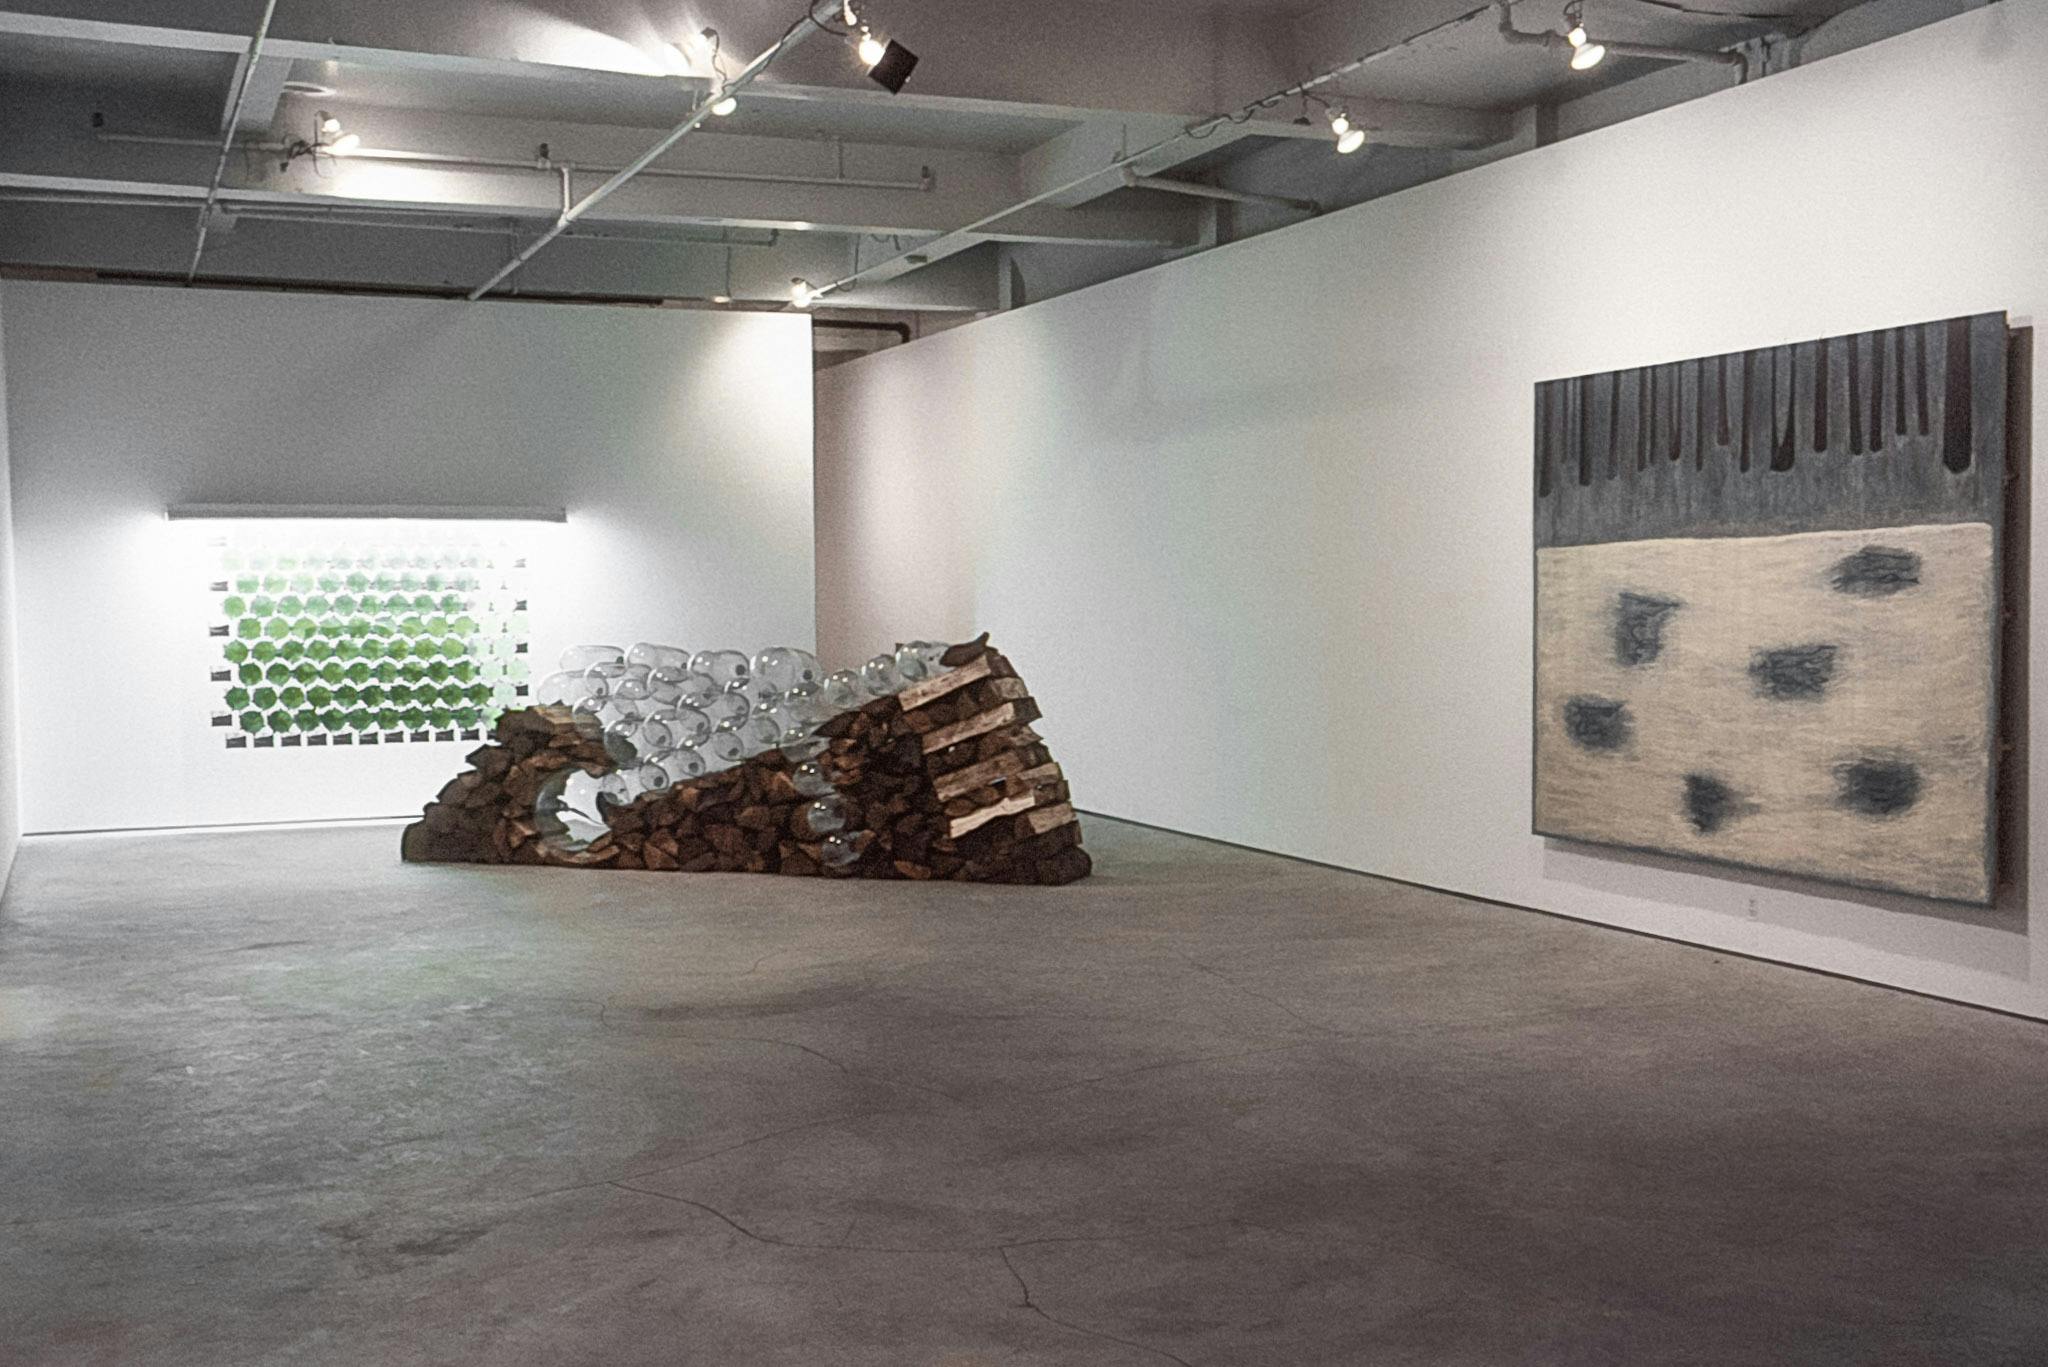 A gallery with 3 visible artworks. One is an illuminated display of green and black shapes on the wall, one is a stack of firewood and glass cylinders, and one is a gray, black, and yellow painting.